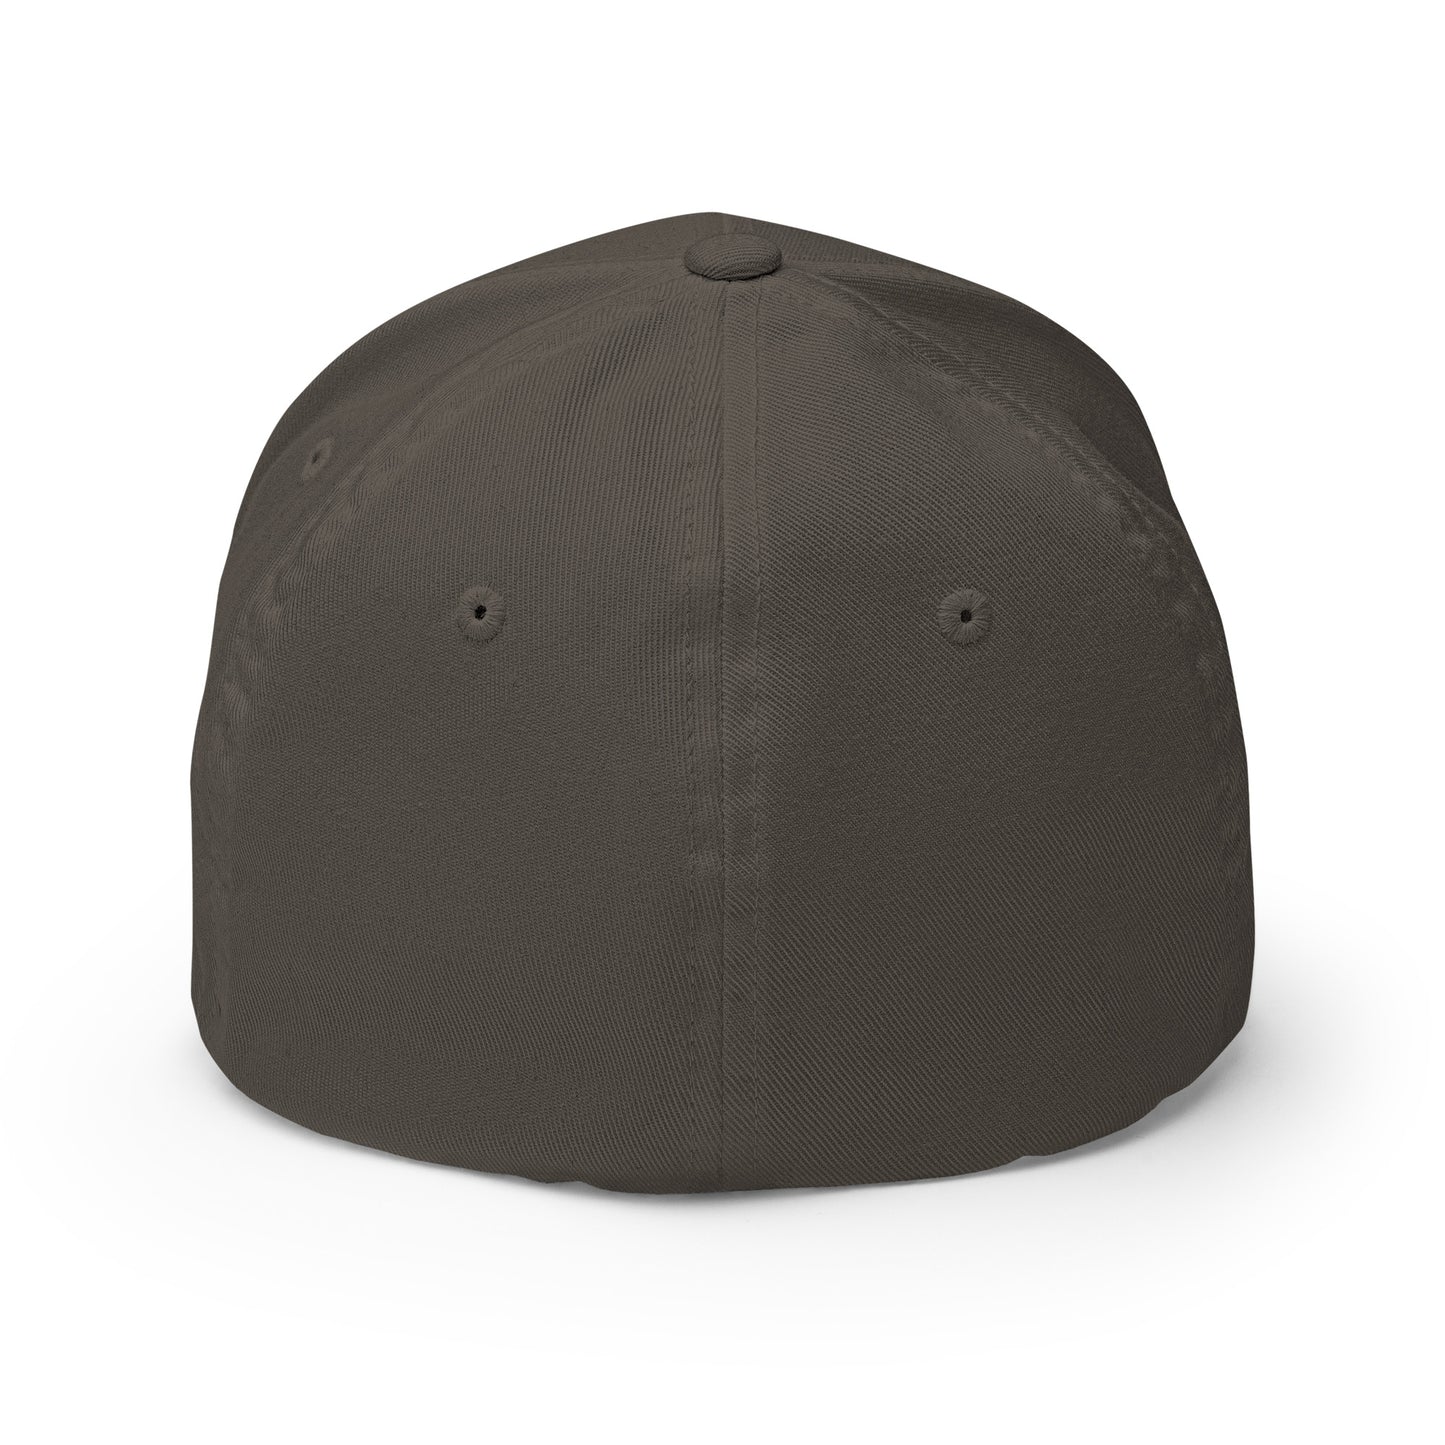 Baseball Cap with Number 4 Four Symbol